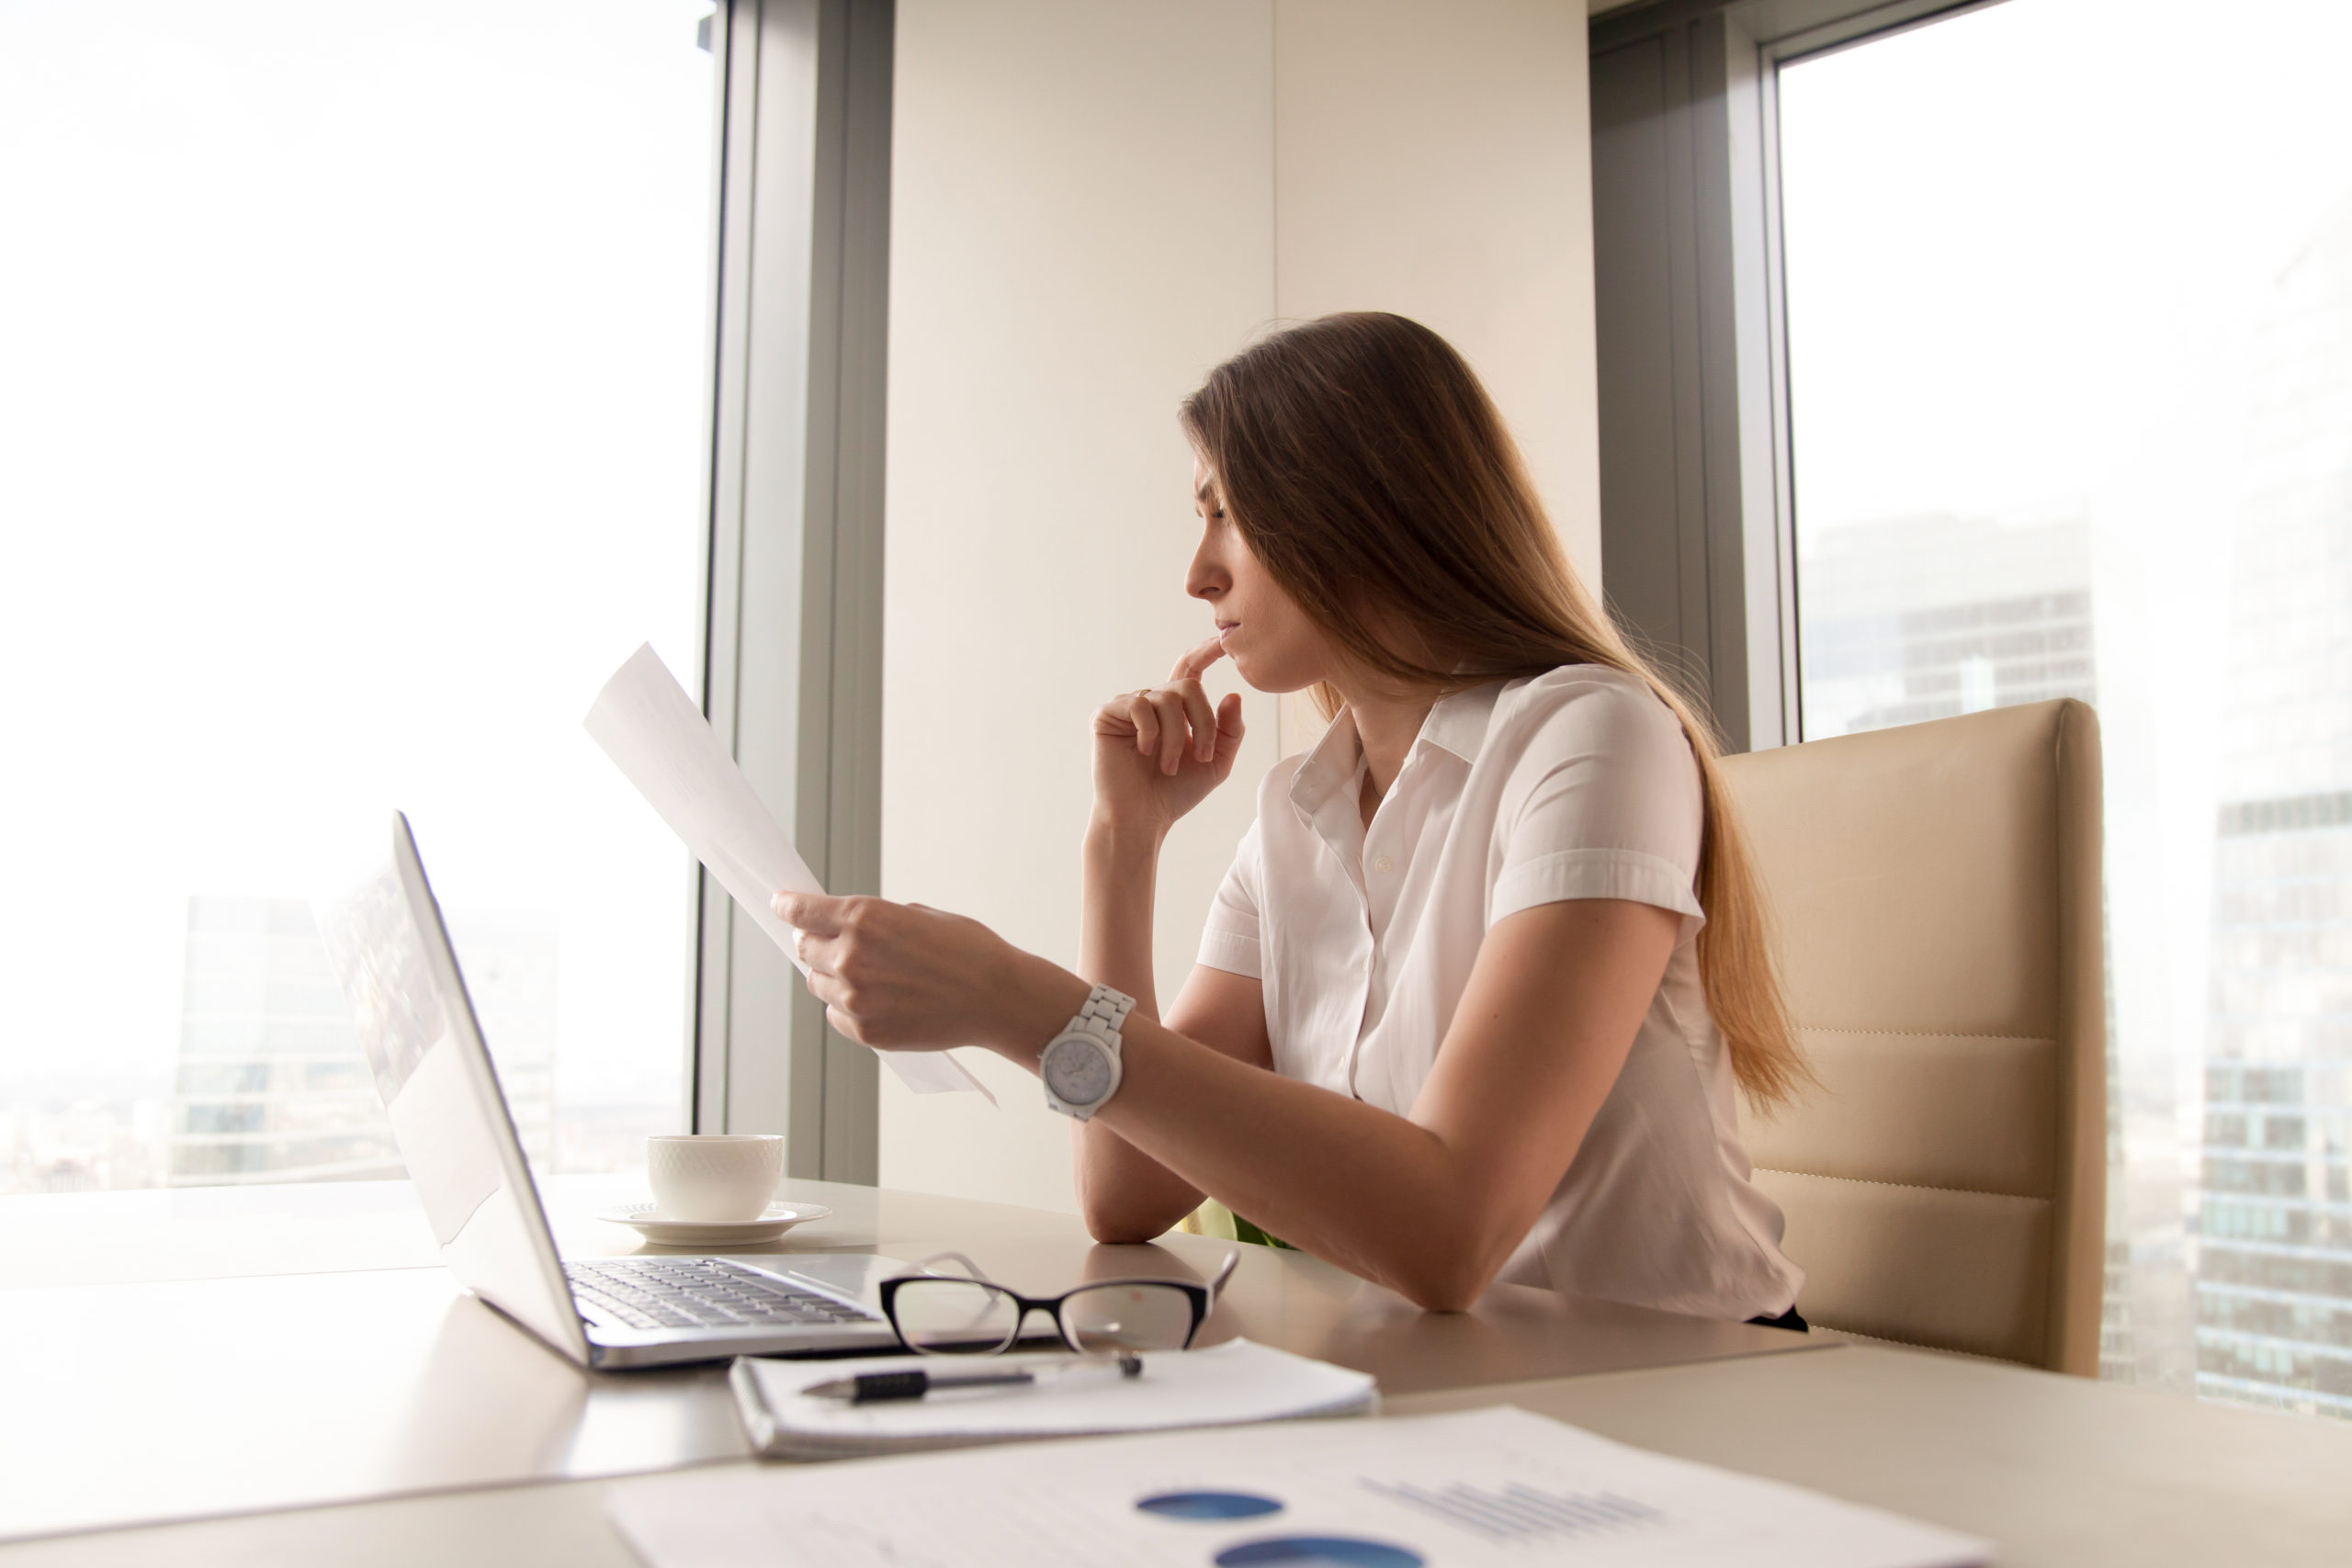 Pensive businesswoman reading document in office